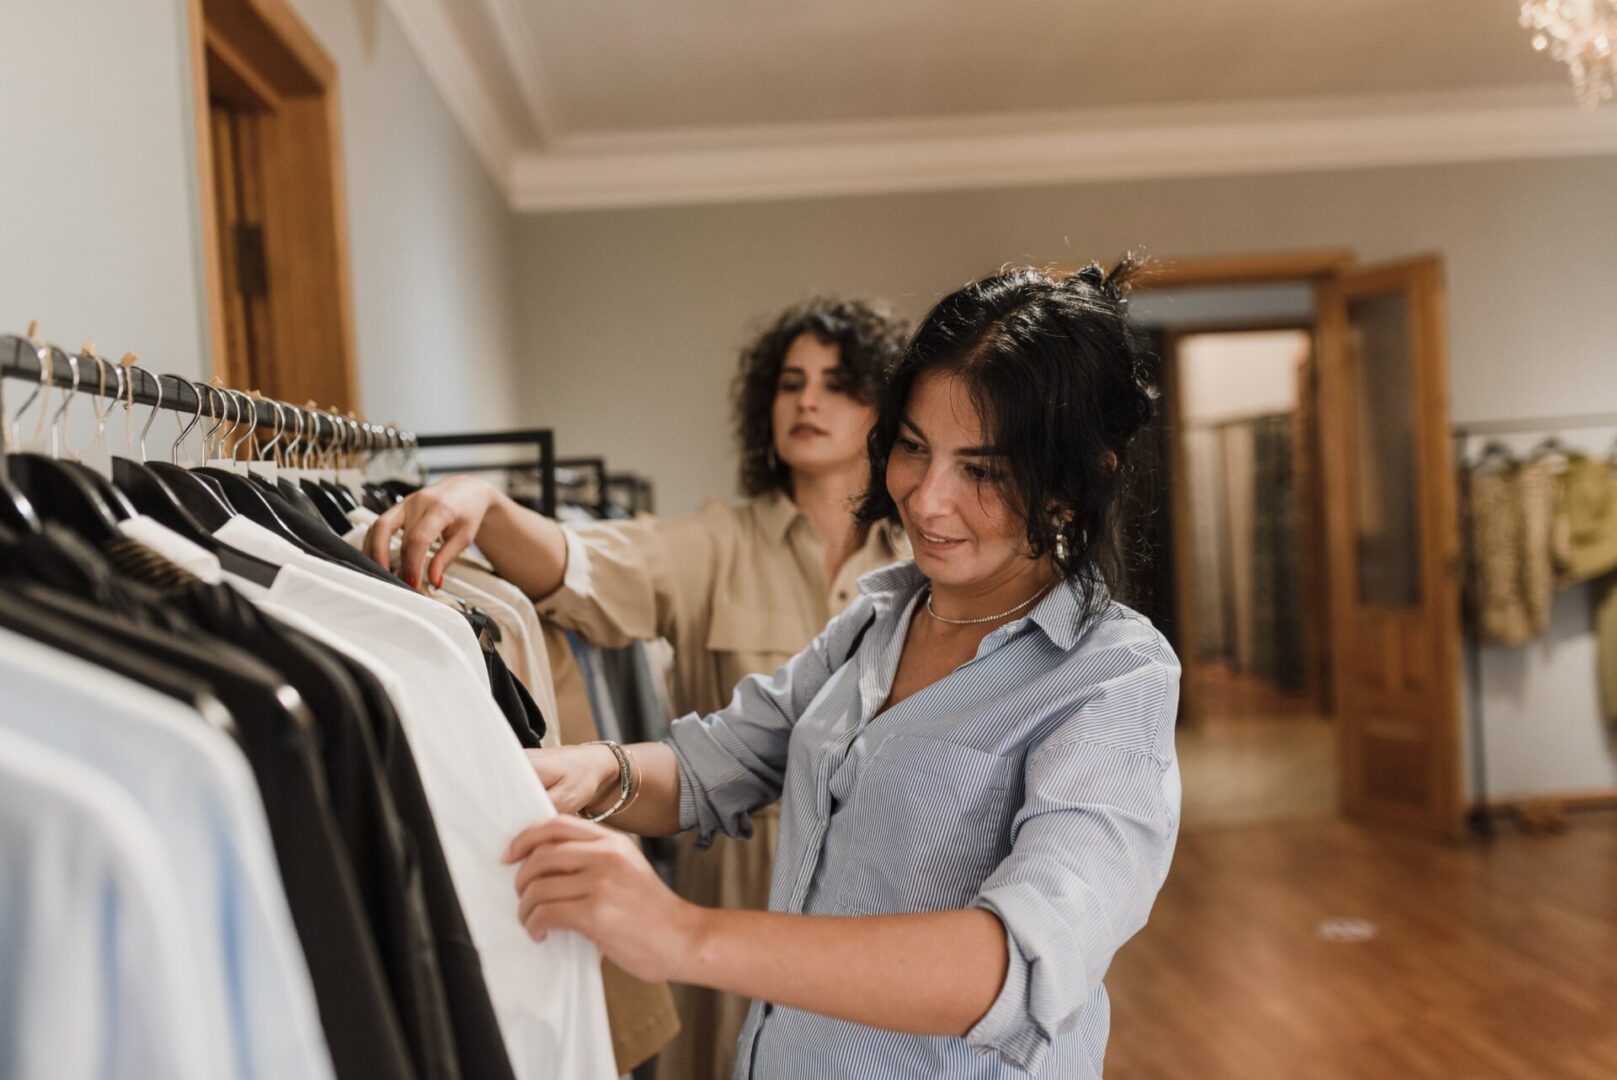 Two women looking at clothes in a clothing store.